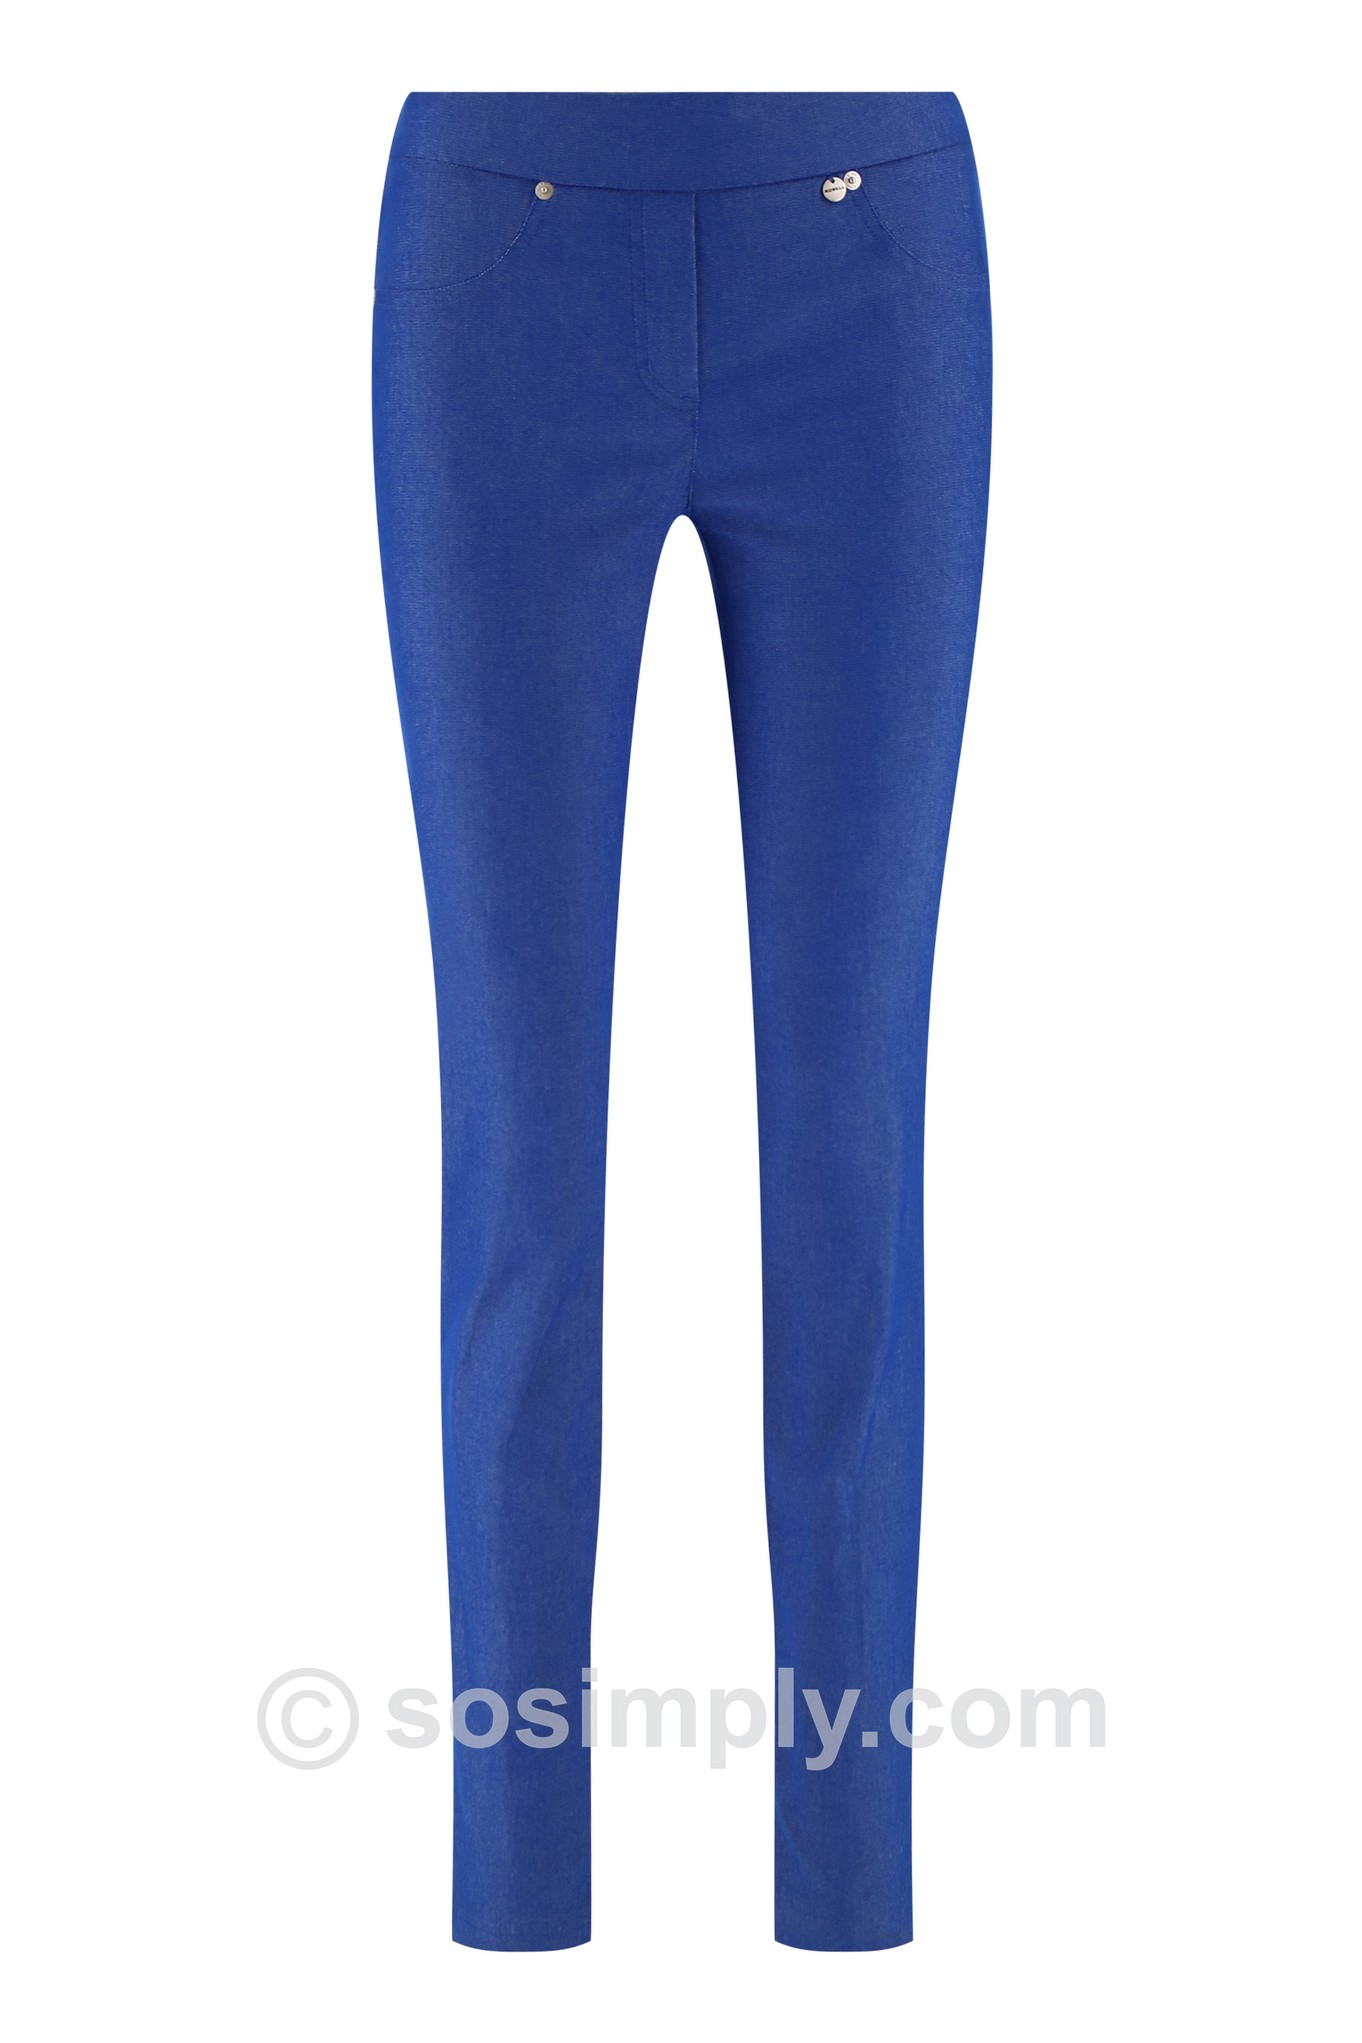 Robell Rose Jean Style Cotton Trouser